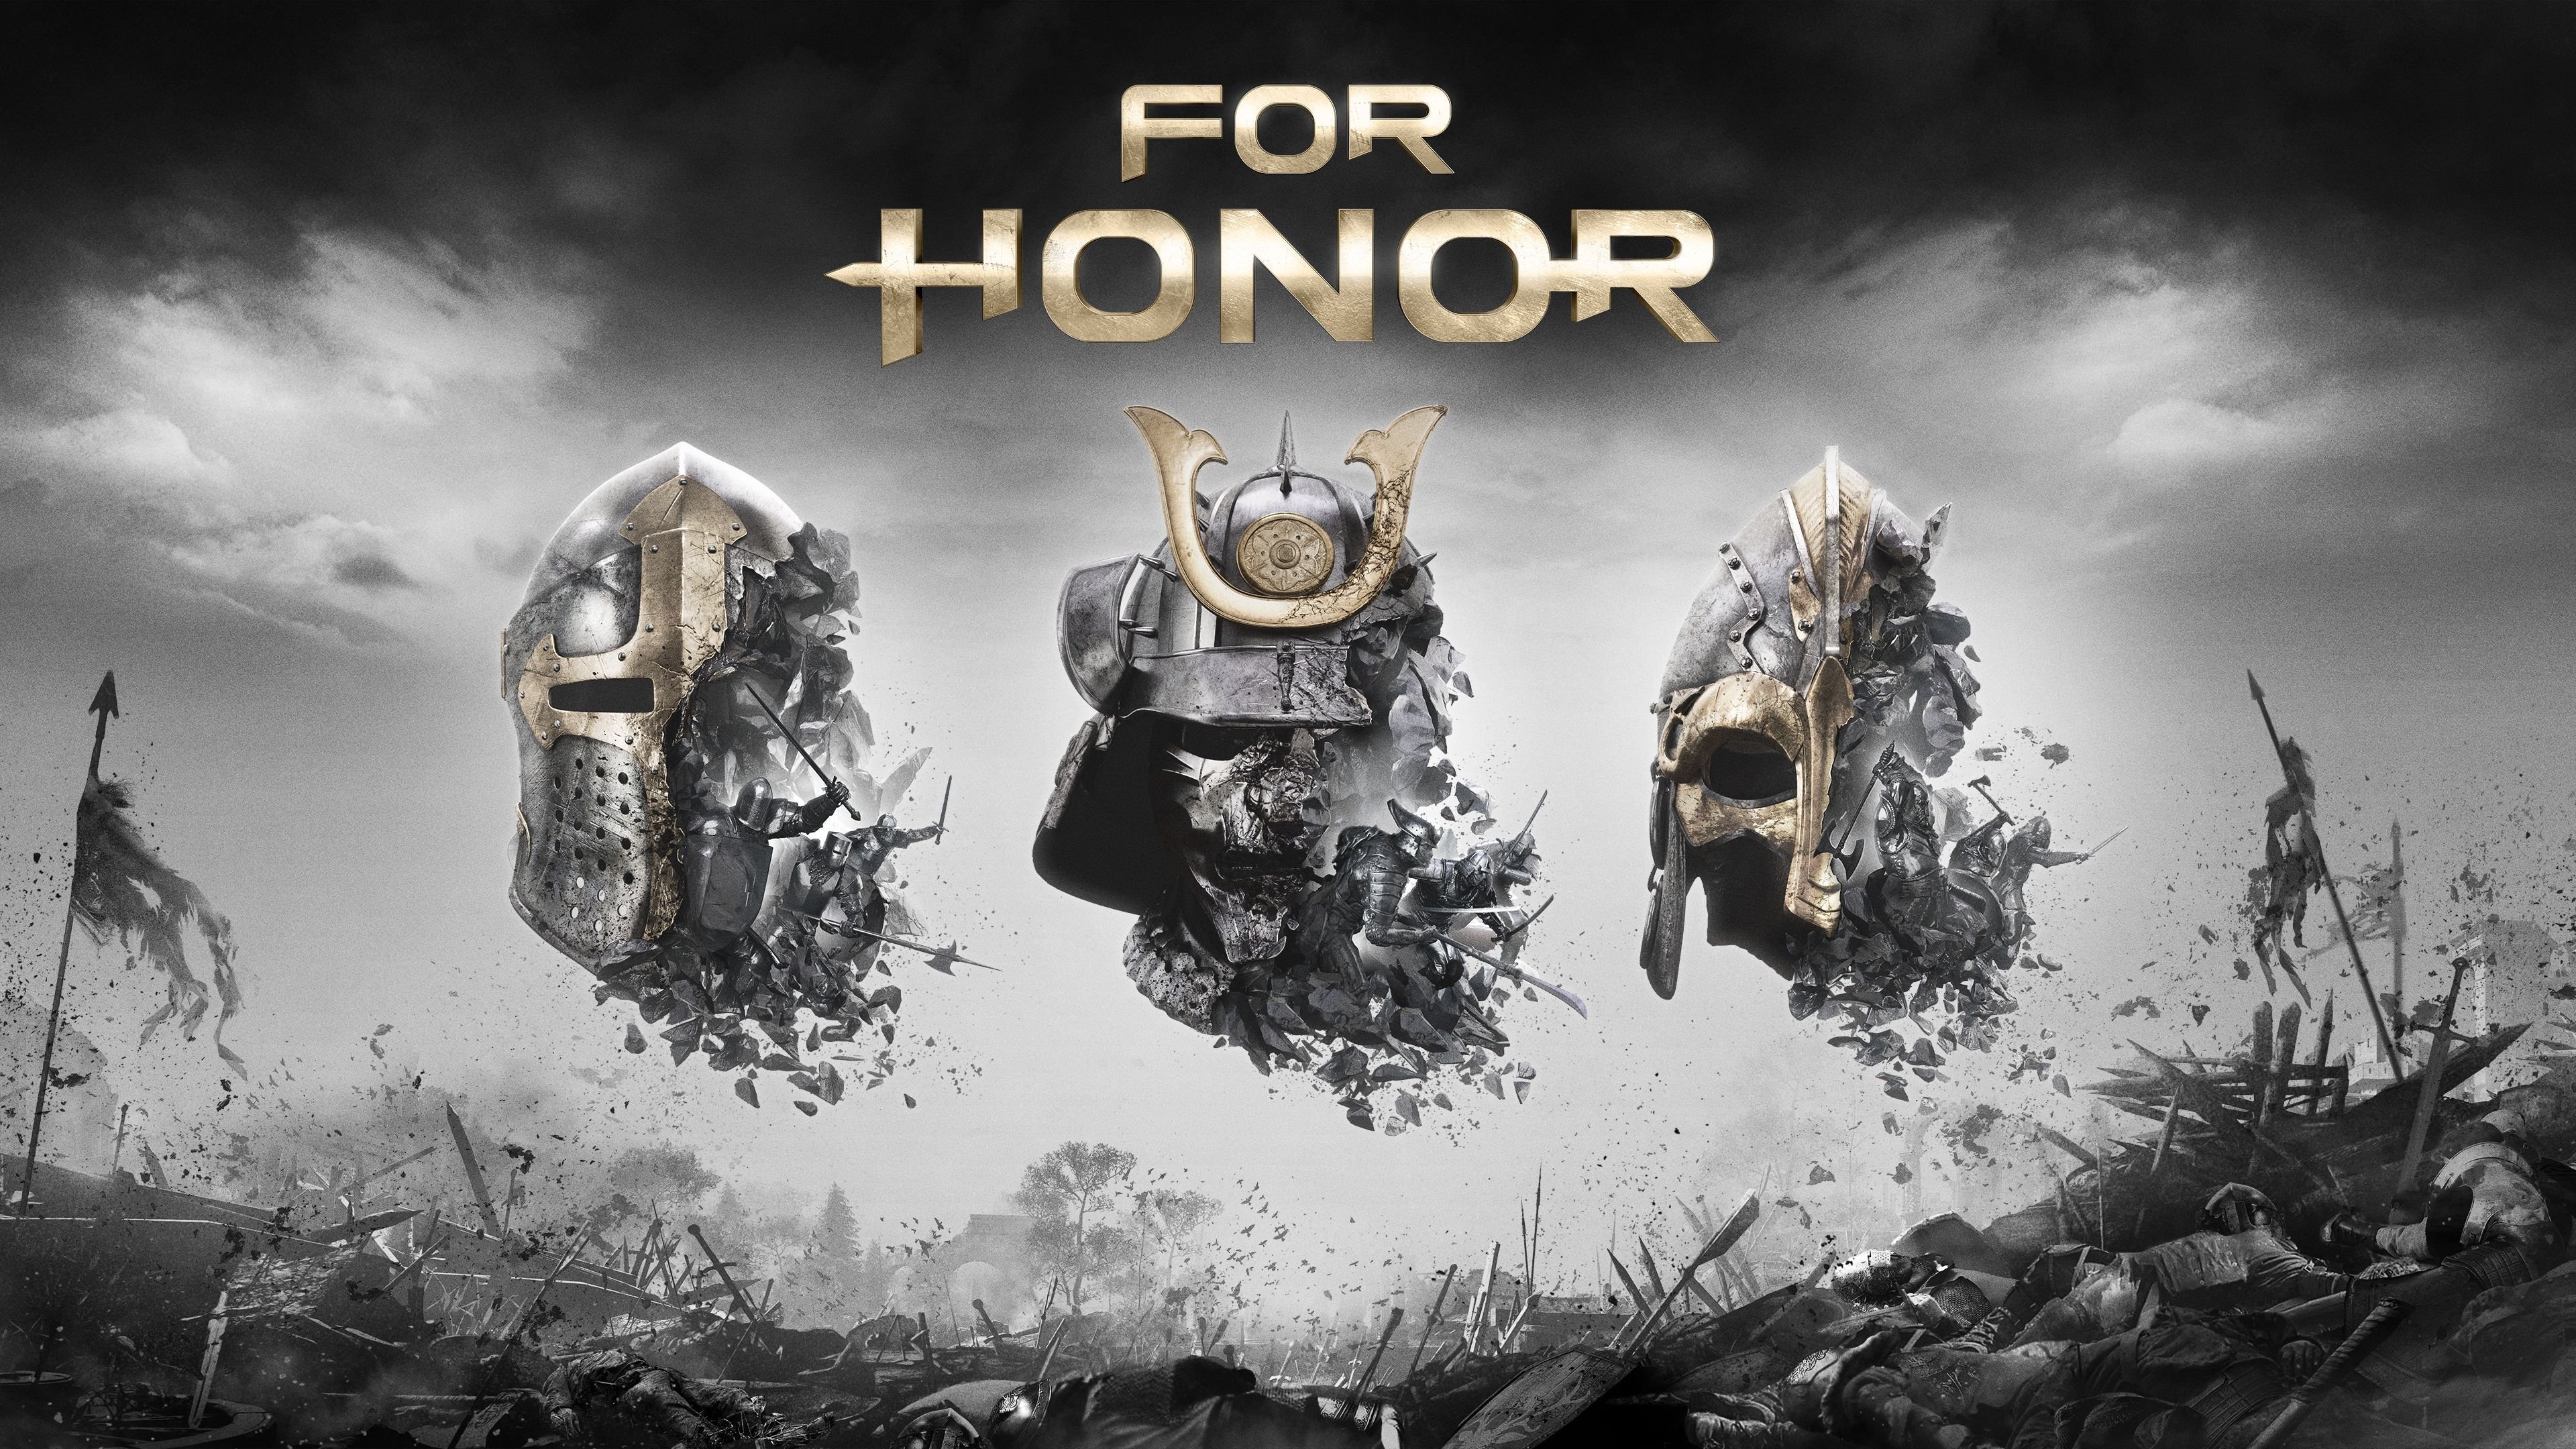 For Honor Houses for 3840 x 2160 Ultra HD resolution